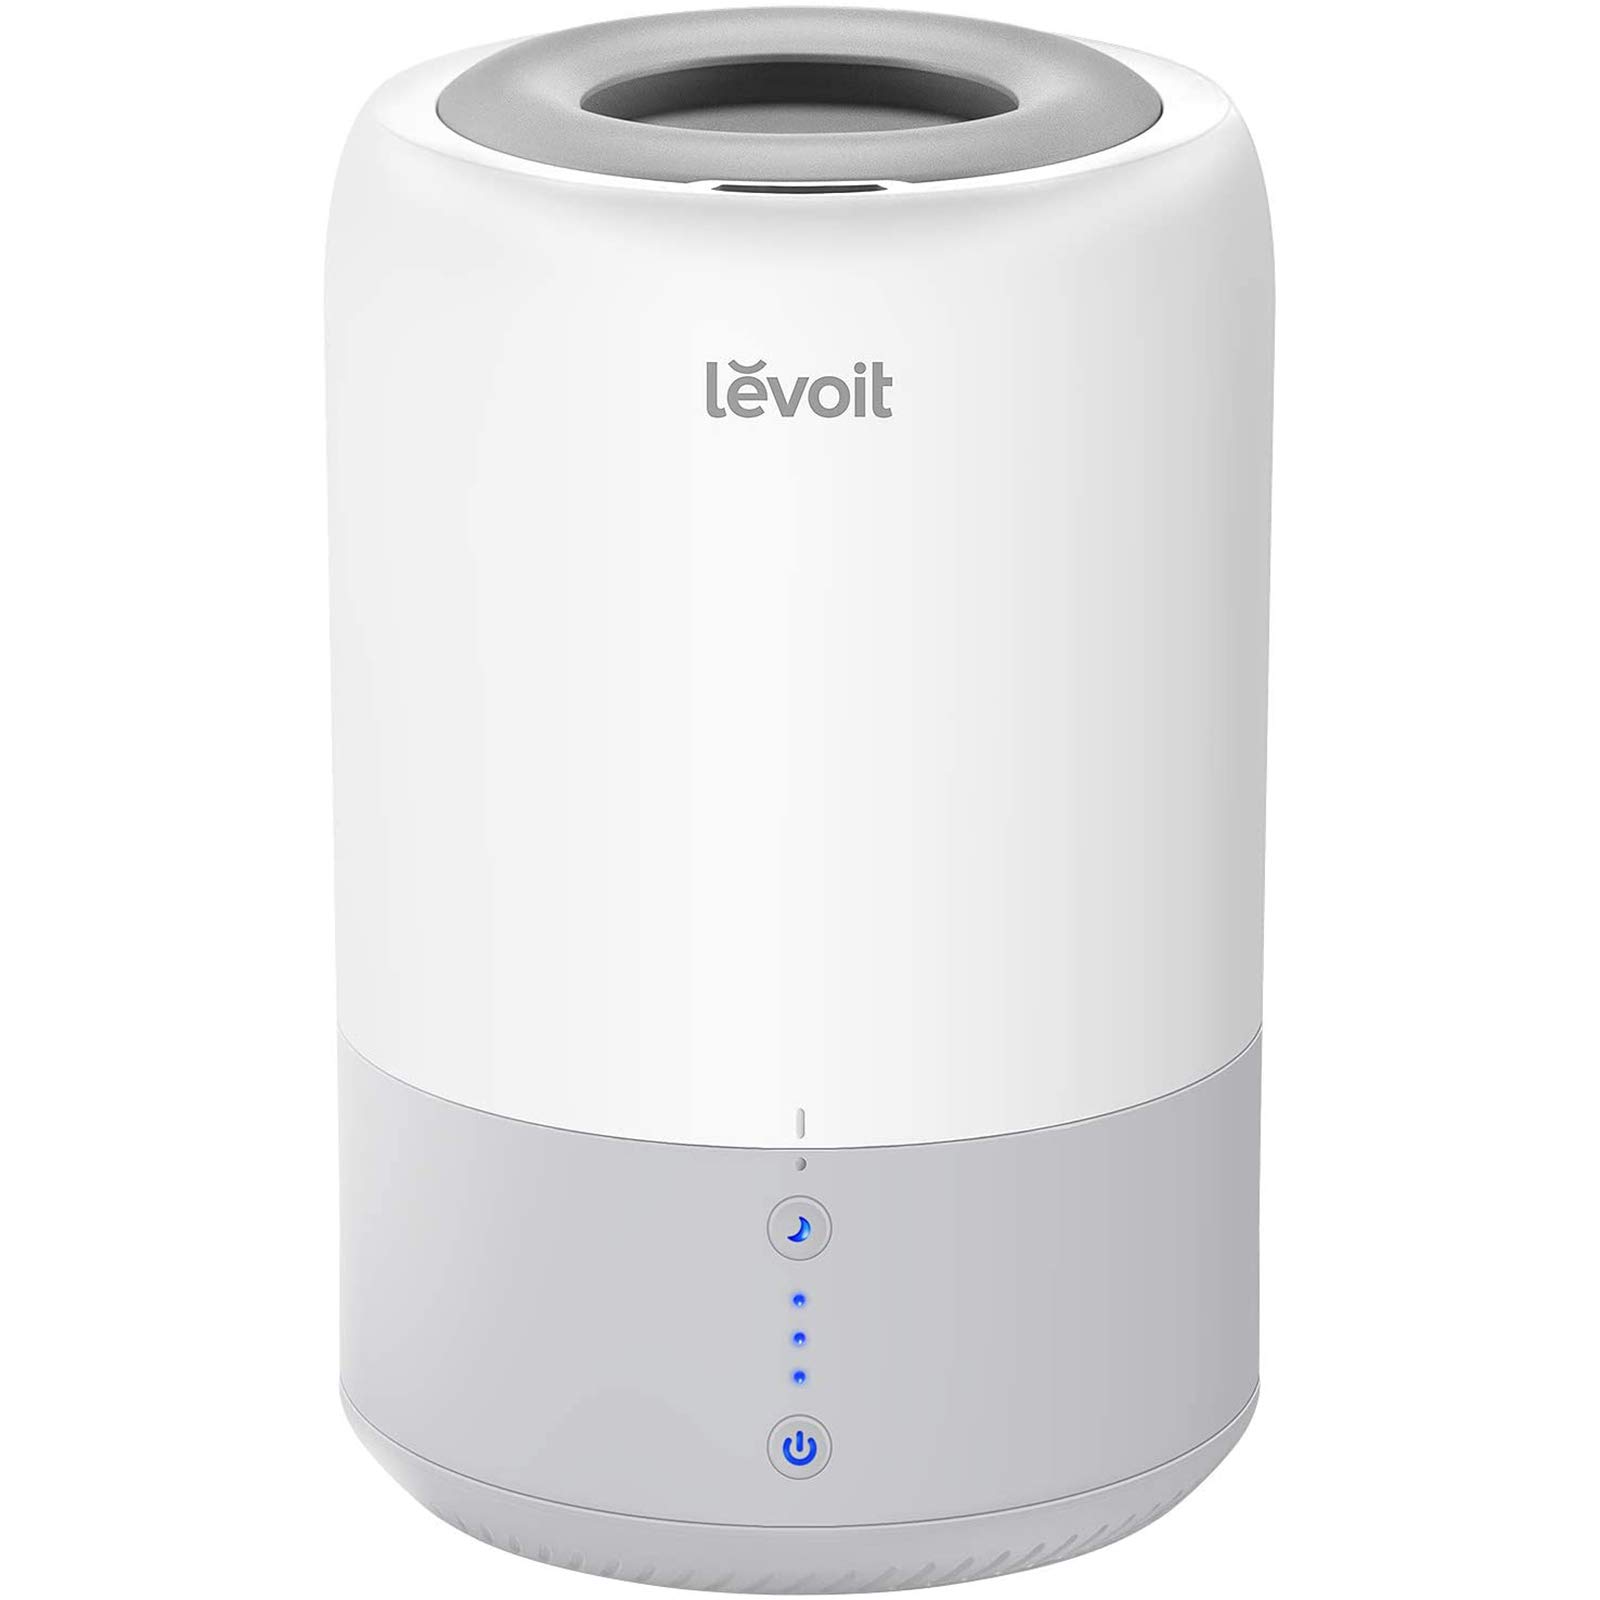 LEVOIT Humidifiers for Bedroom, Cool Mist Air Vaporizer for Babies, Ultrasonic Top Fill Essential Oil Diffuser, Smart Sleep Mode, Auto Shut Off, Quiet, 1.8L, Gray